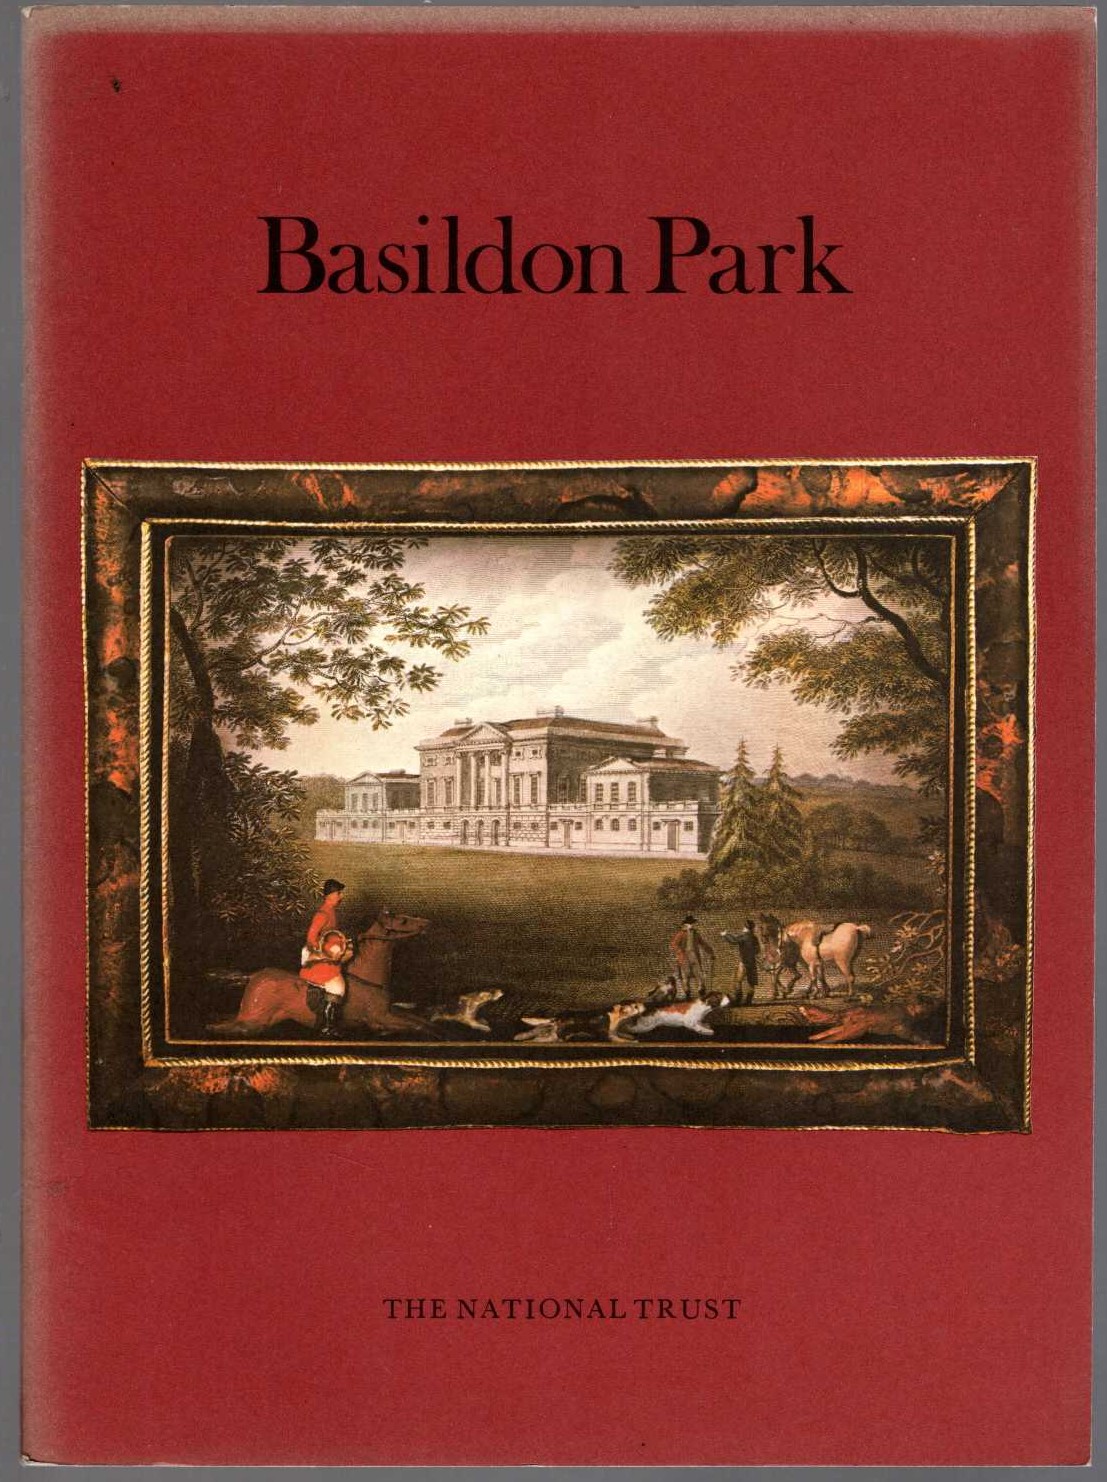 

\ BASILDON PARK by The National Trust front book cover image